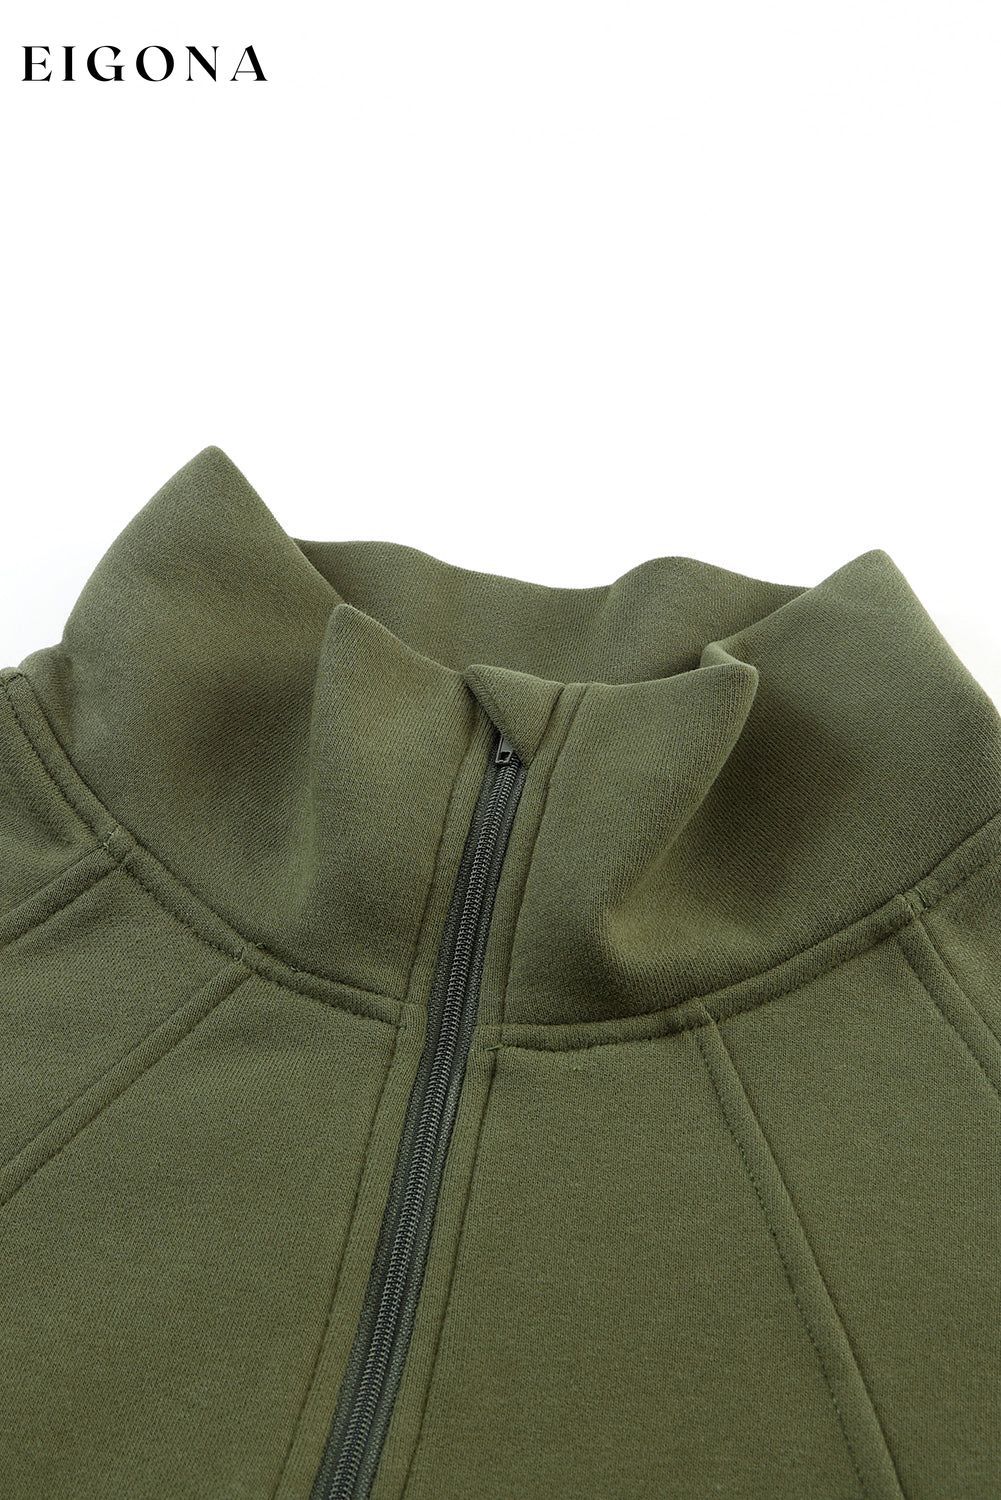 Green Zip Up Stand Collar Ribbed Thumbhole Sleeve Sweatshirt clothes Craft Patchwork Fall To Winter Occasion Daily Outerwear Print Solid Color Season Fall & Autumn Style Casual Sweater sweaters